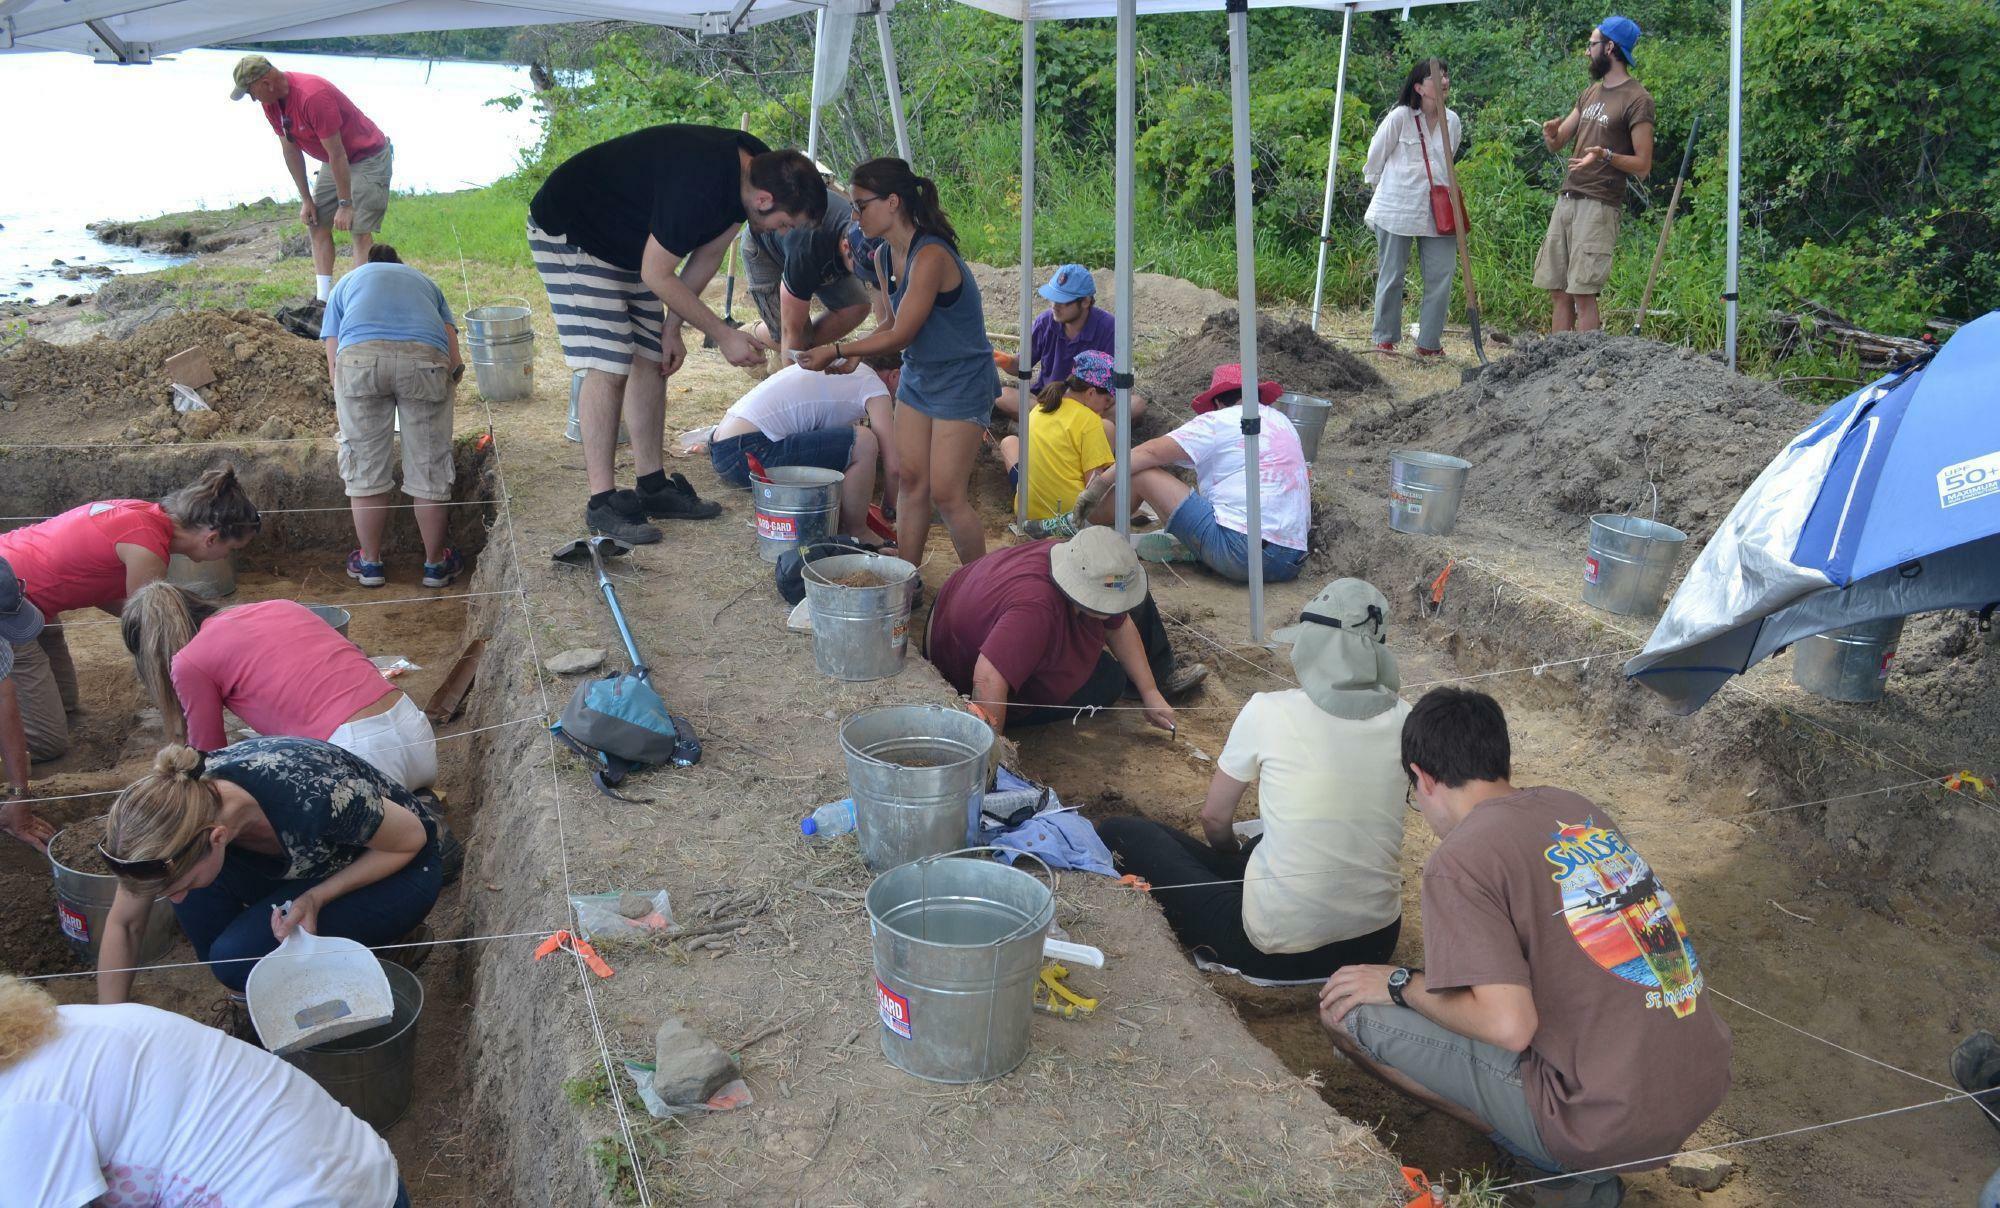 People participating in archaeological excavations